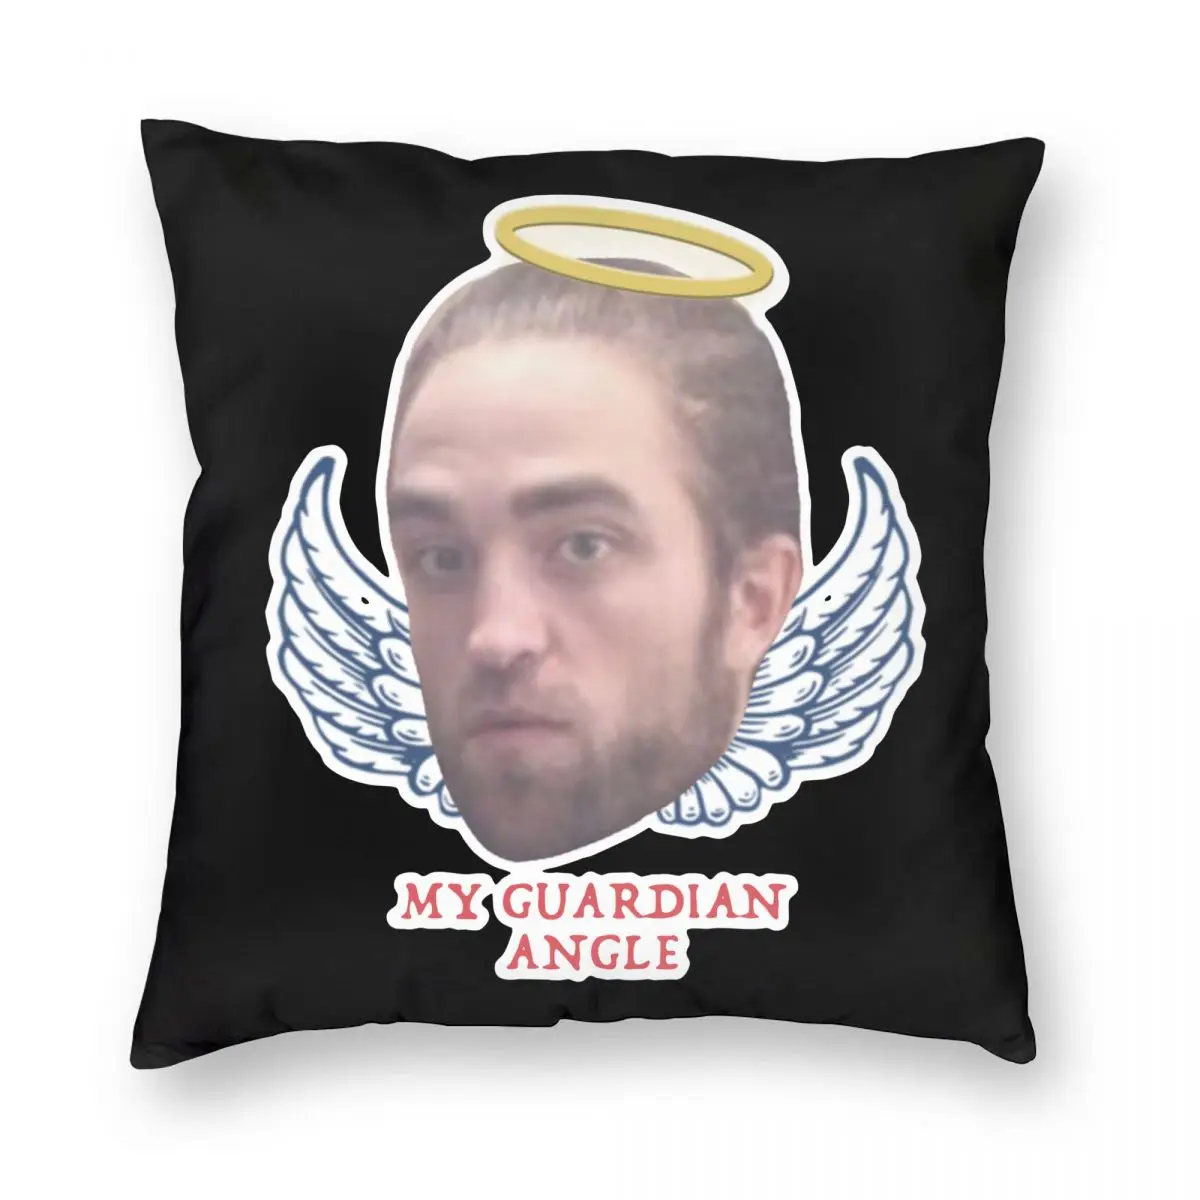 

Robert Pattinson Is My Guardian Angel Pillowcase Printed Polyester Cushion Cover Decorative Pillow Case Cover Home 18''